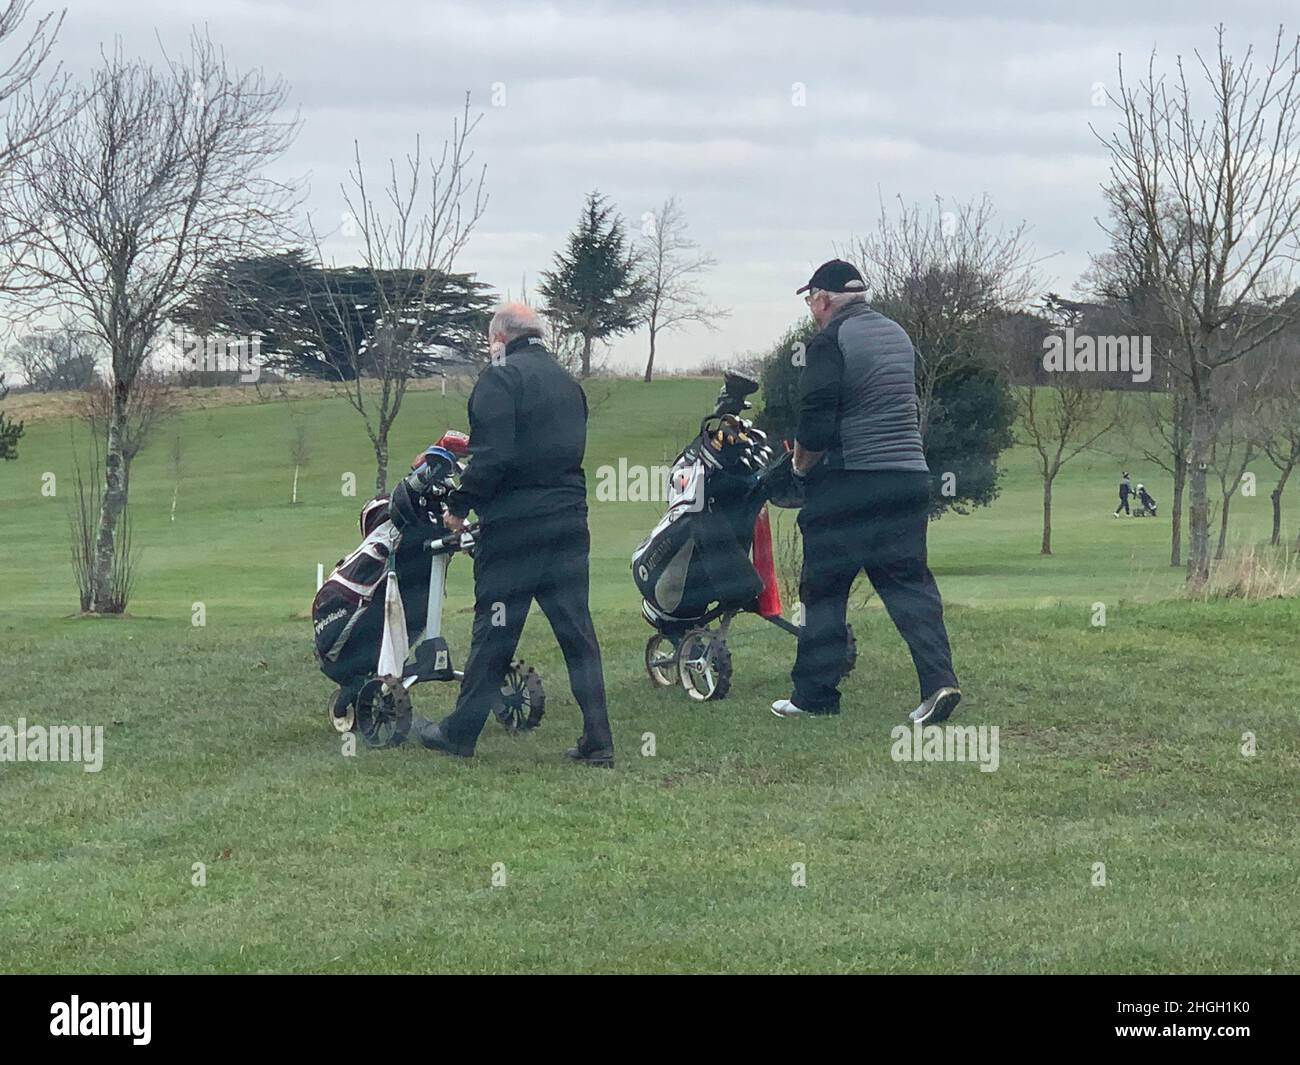 Overstone Golf club Northampton UK play players trolley outside walking bag bags course walk walking grass cap coat caps wheels people person jacket Stock Photo